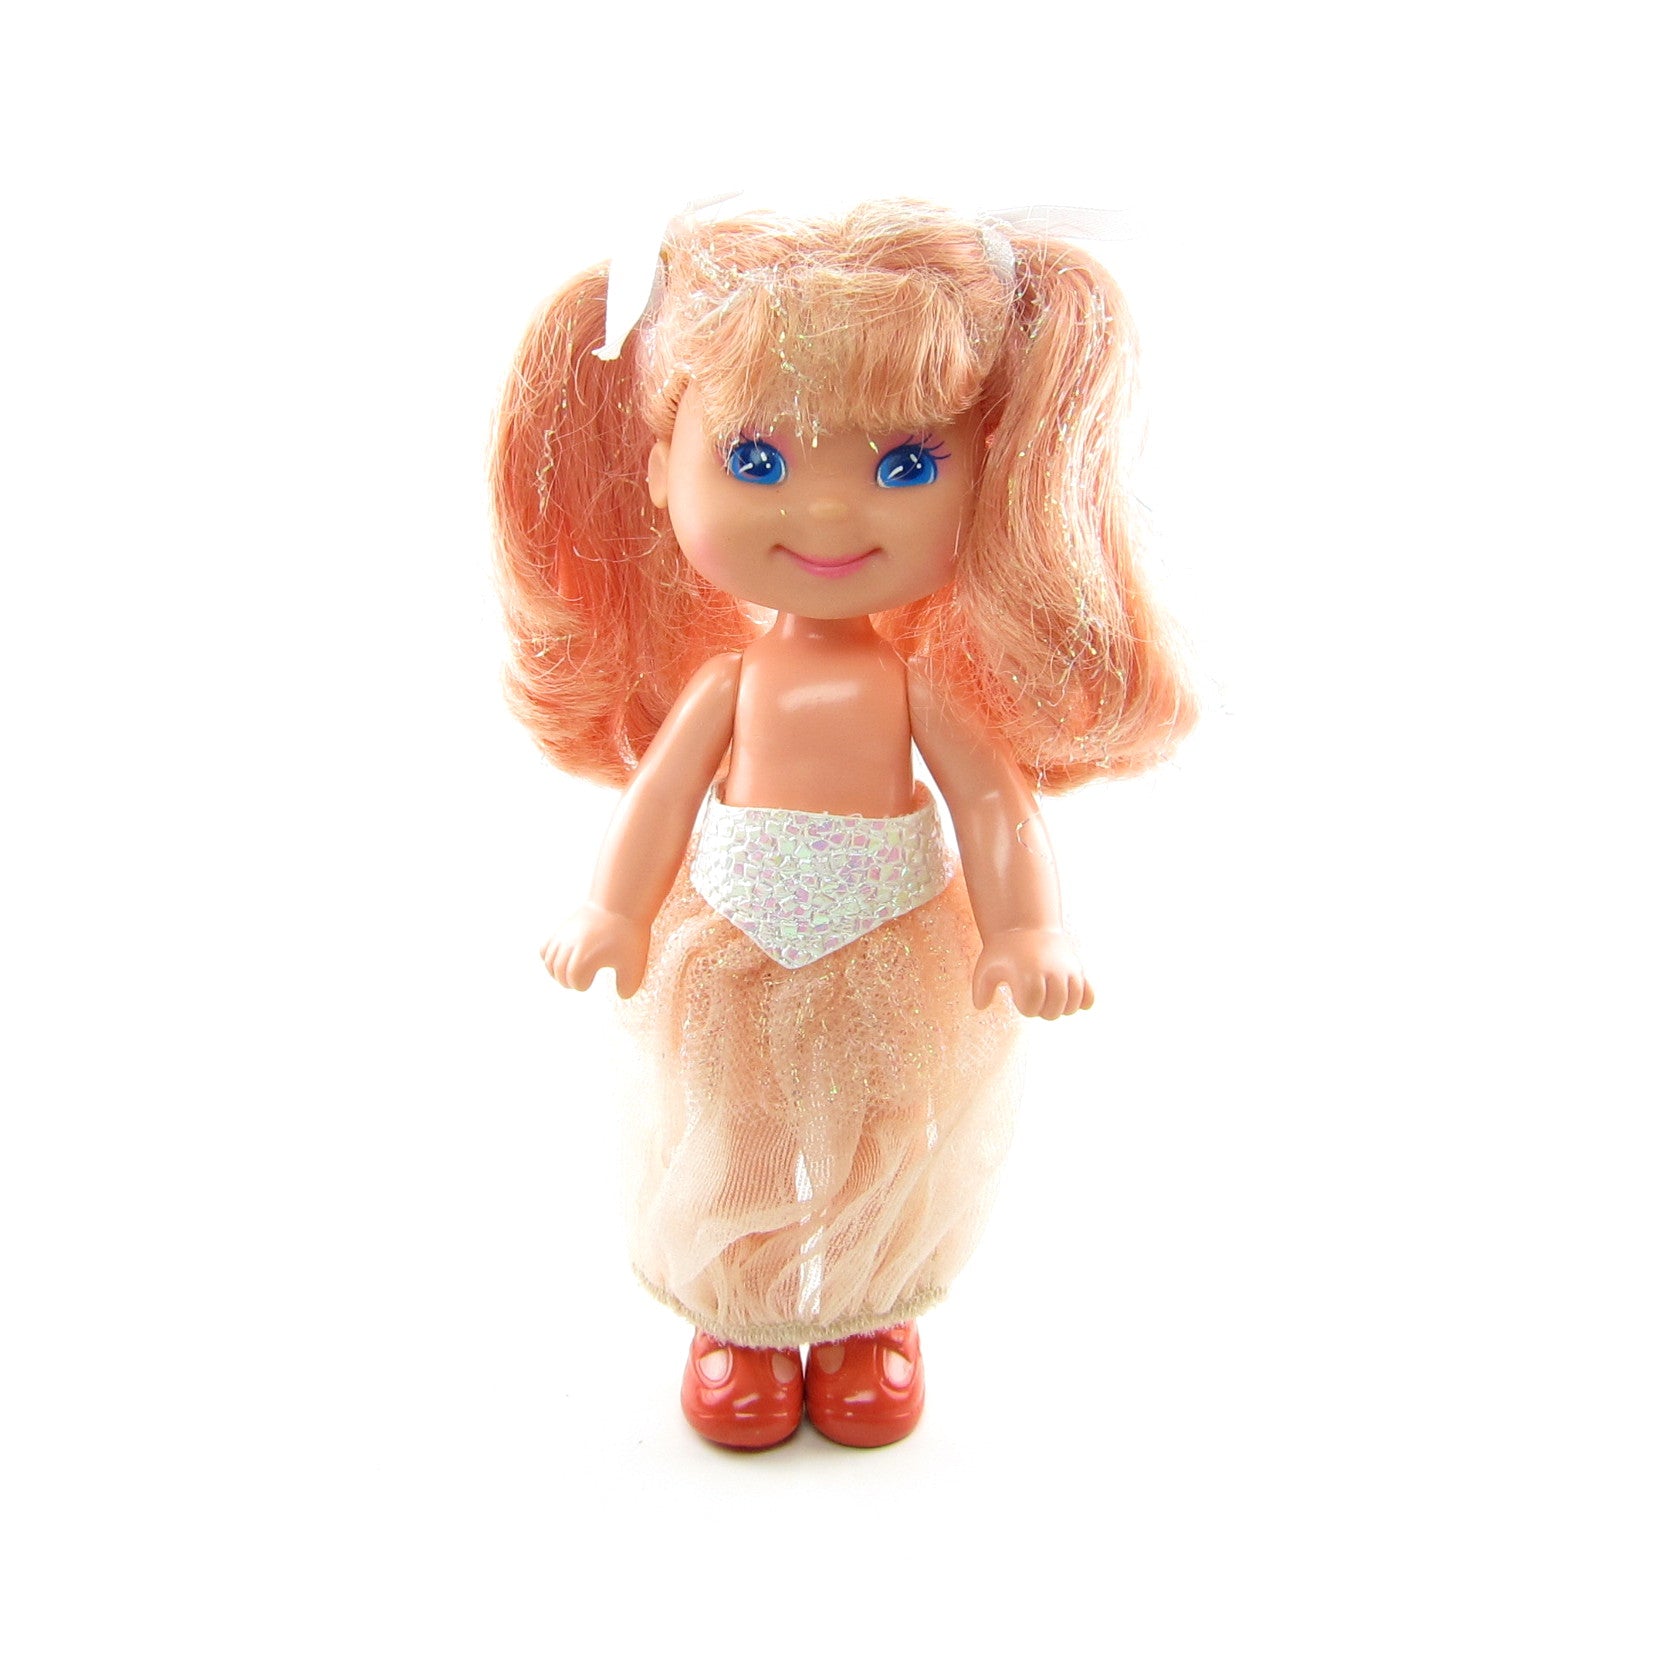 Peach Perfection Cherry Merry Muffin 1990 doll